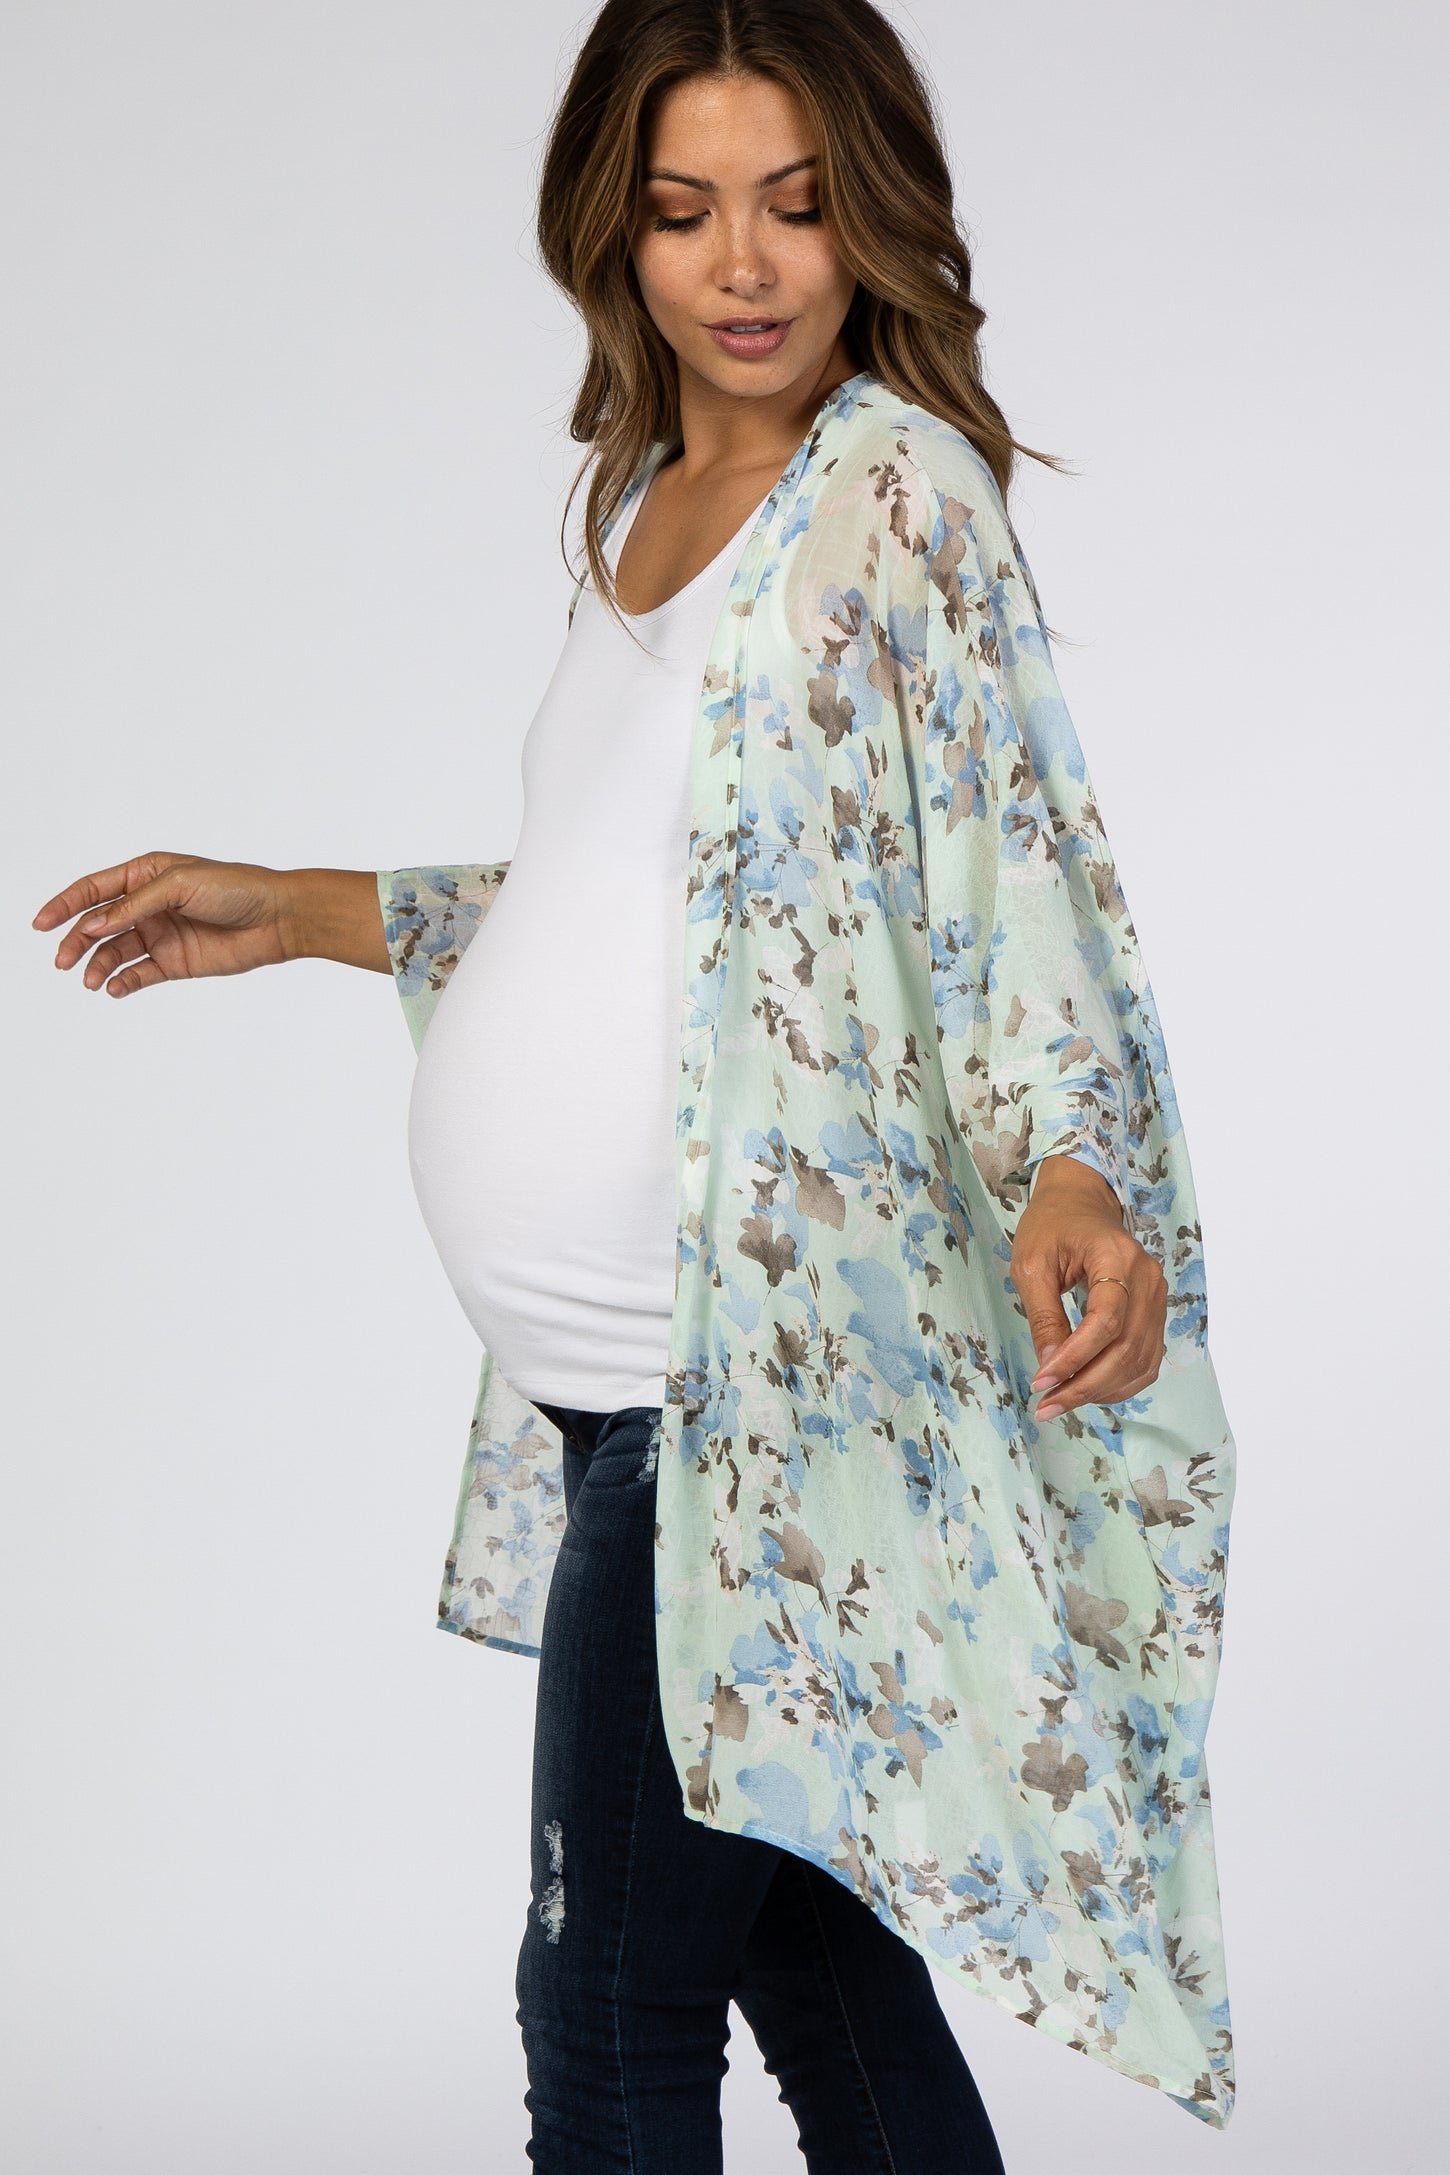 Mint Floral Chiffon Maternity Cover Up